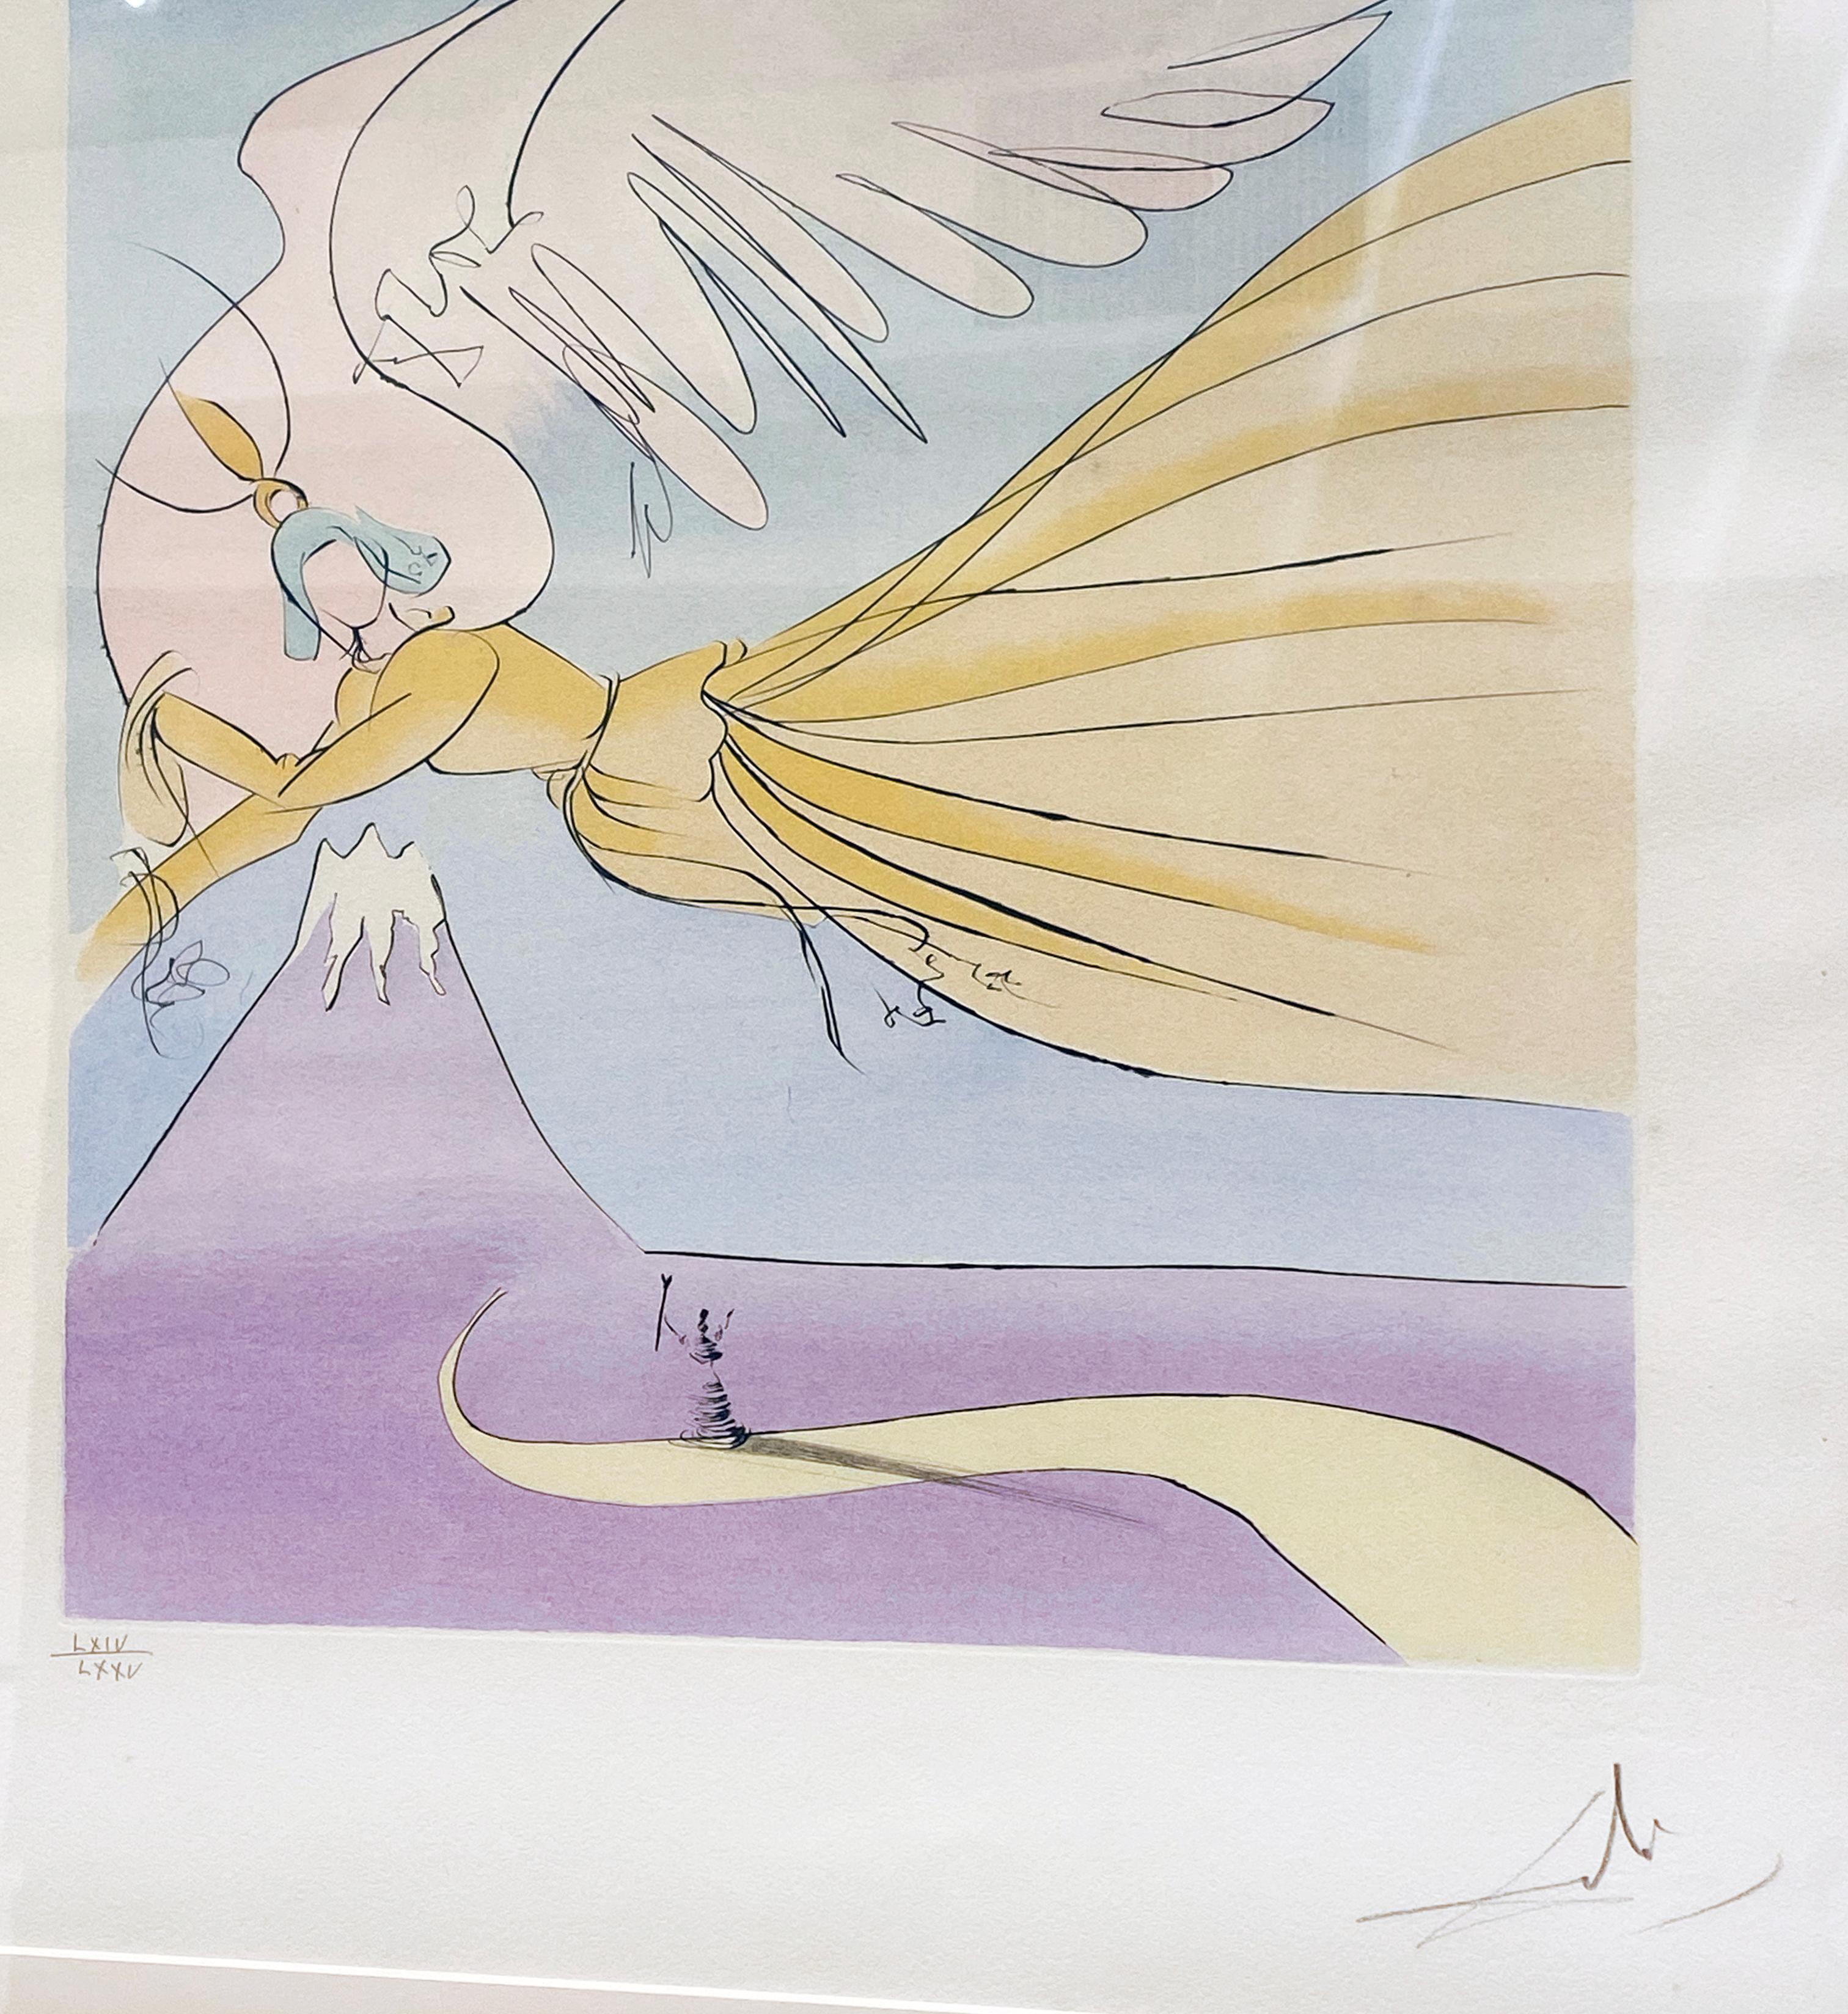 The Robe of Feathers - Surrealist Print by Salvador Dalí